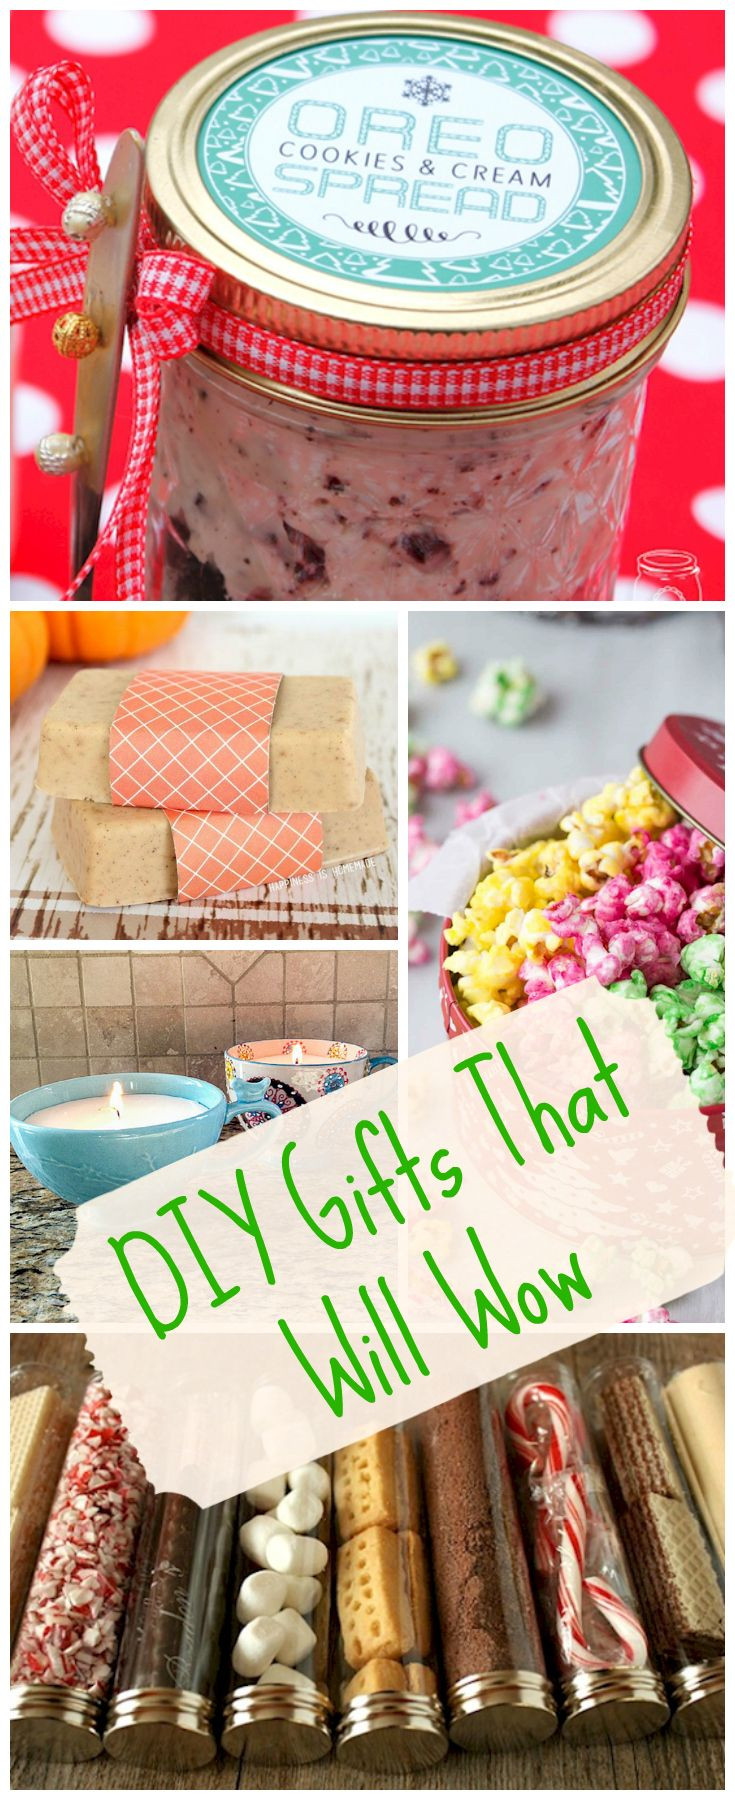 DIY Christmas Gift For Coworkers
 Best 25 Homemade t baskets ideas on Pinterest